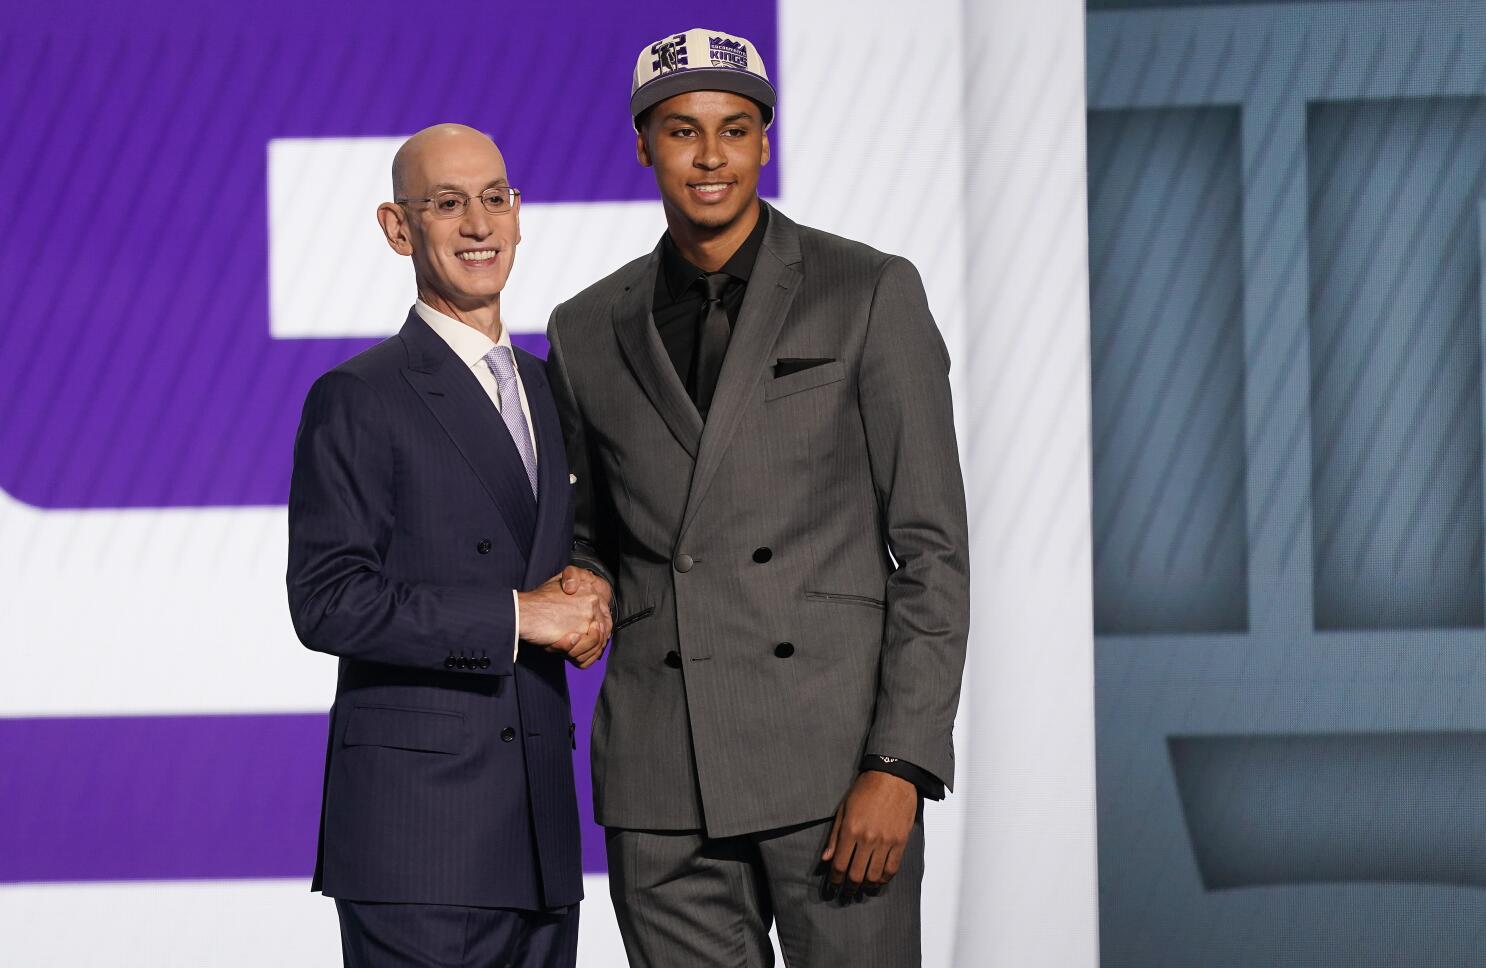 12 Stellar Outfits From the 2022 NBA Draft